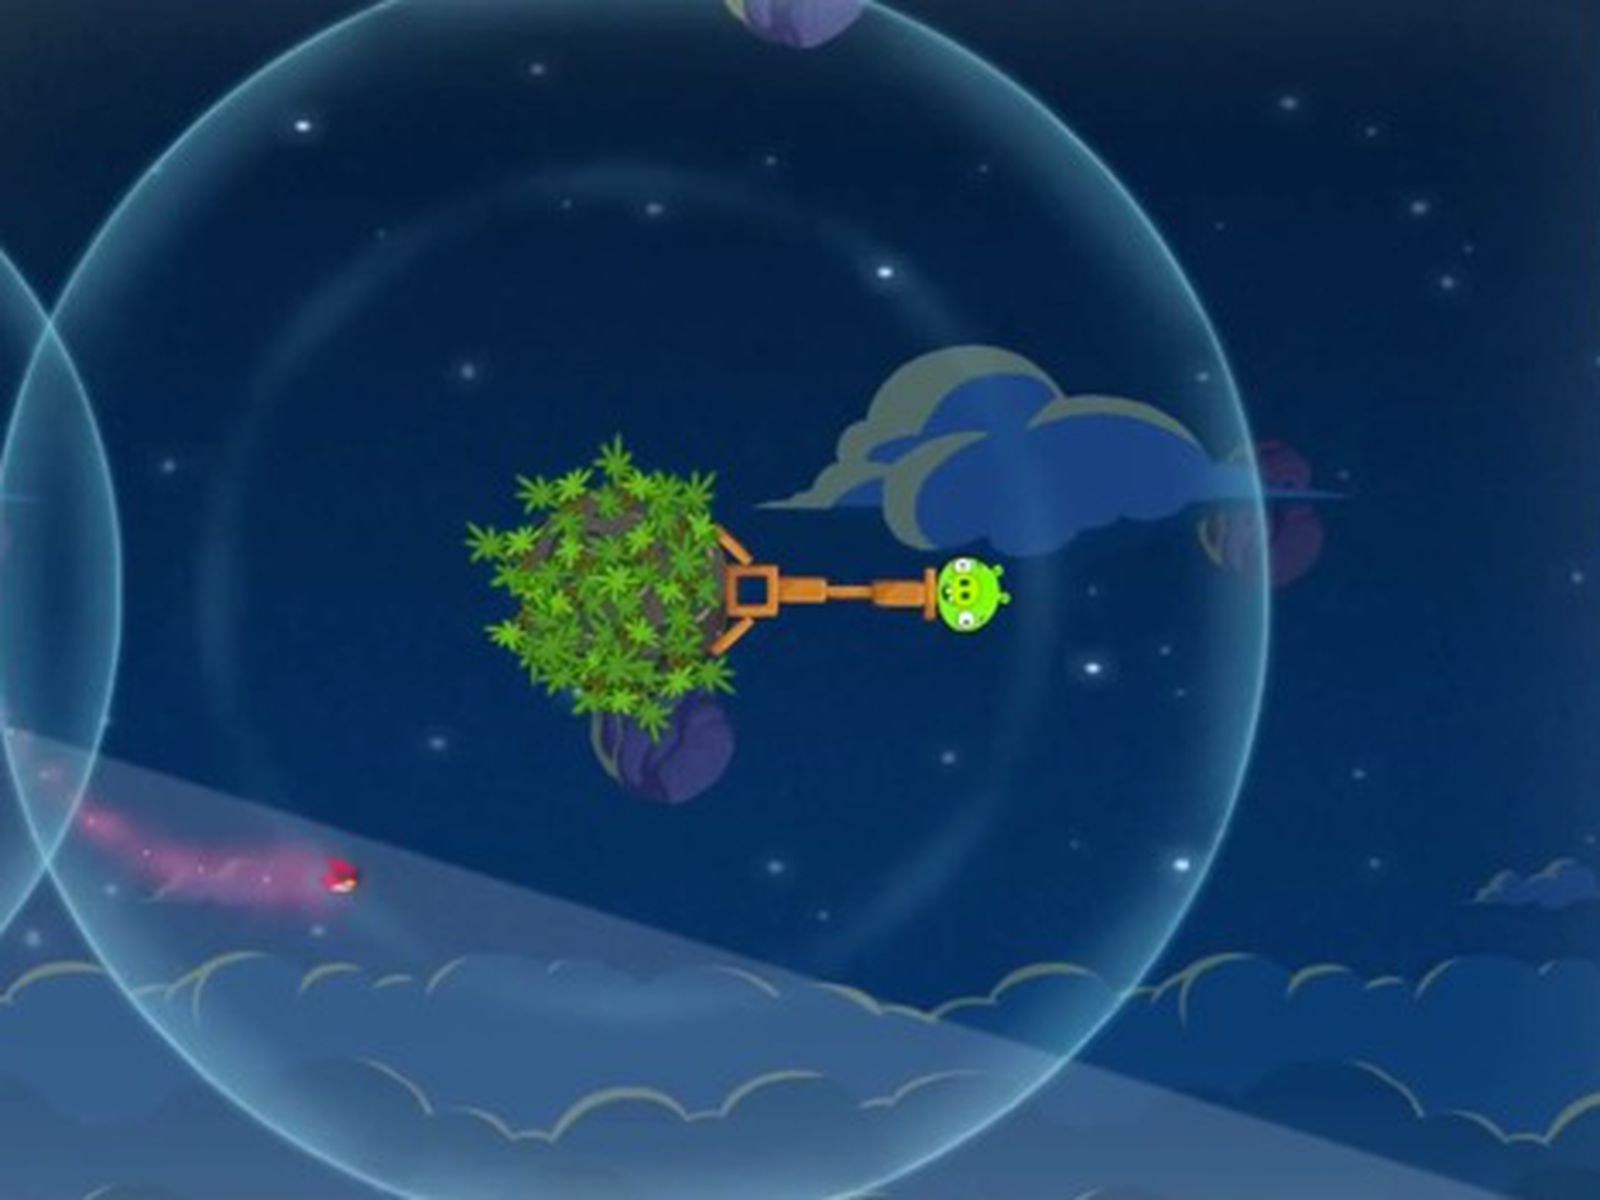 Angry Birds Space for Mac - Download